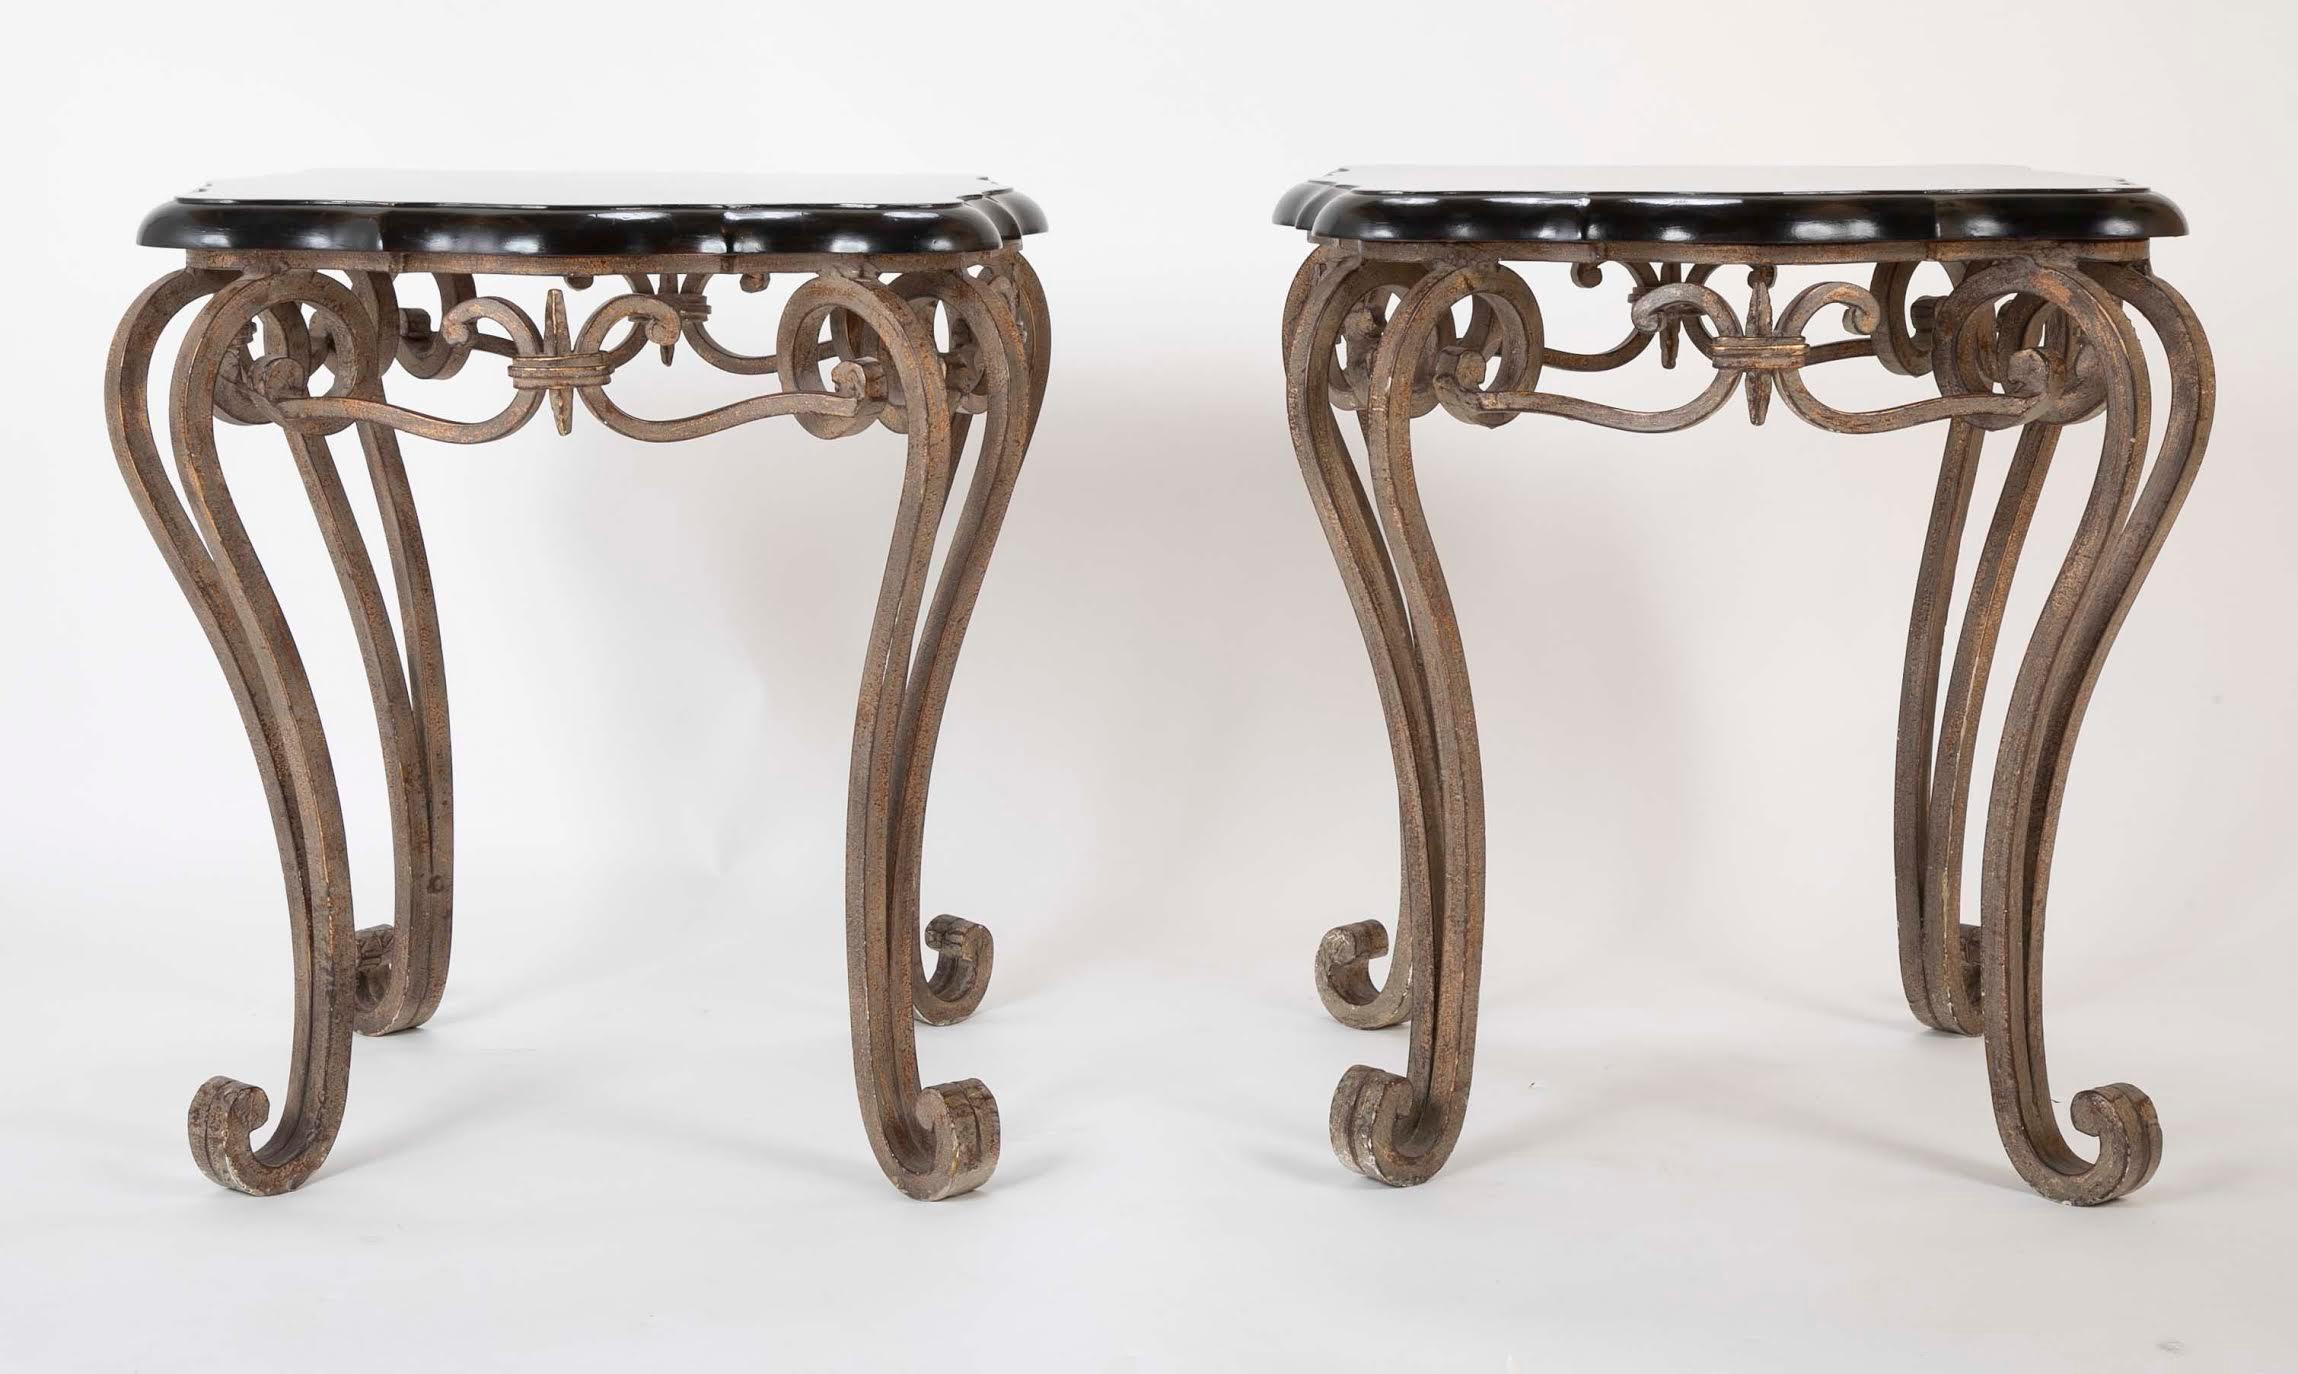 Pair of wrought iron side tables with shaped black lacquered tops over scrolling cabriole legs with a silvery gray finish. These impressive tables have real presence. 
26 inches high by 24 by 24.